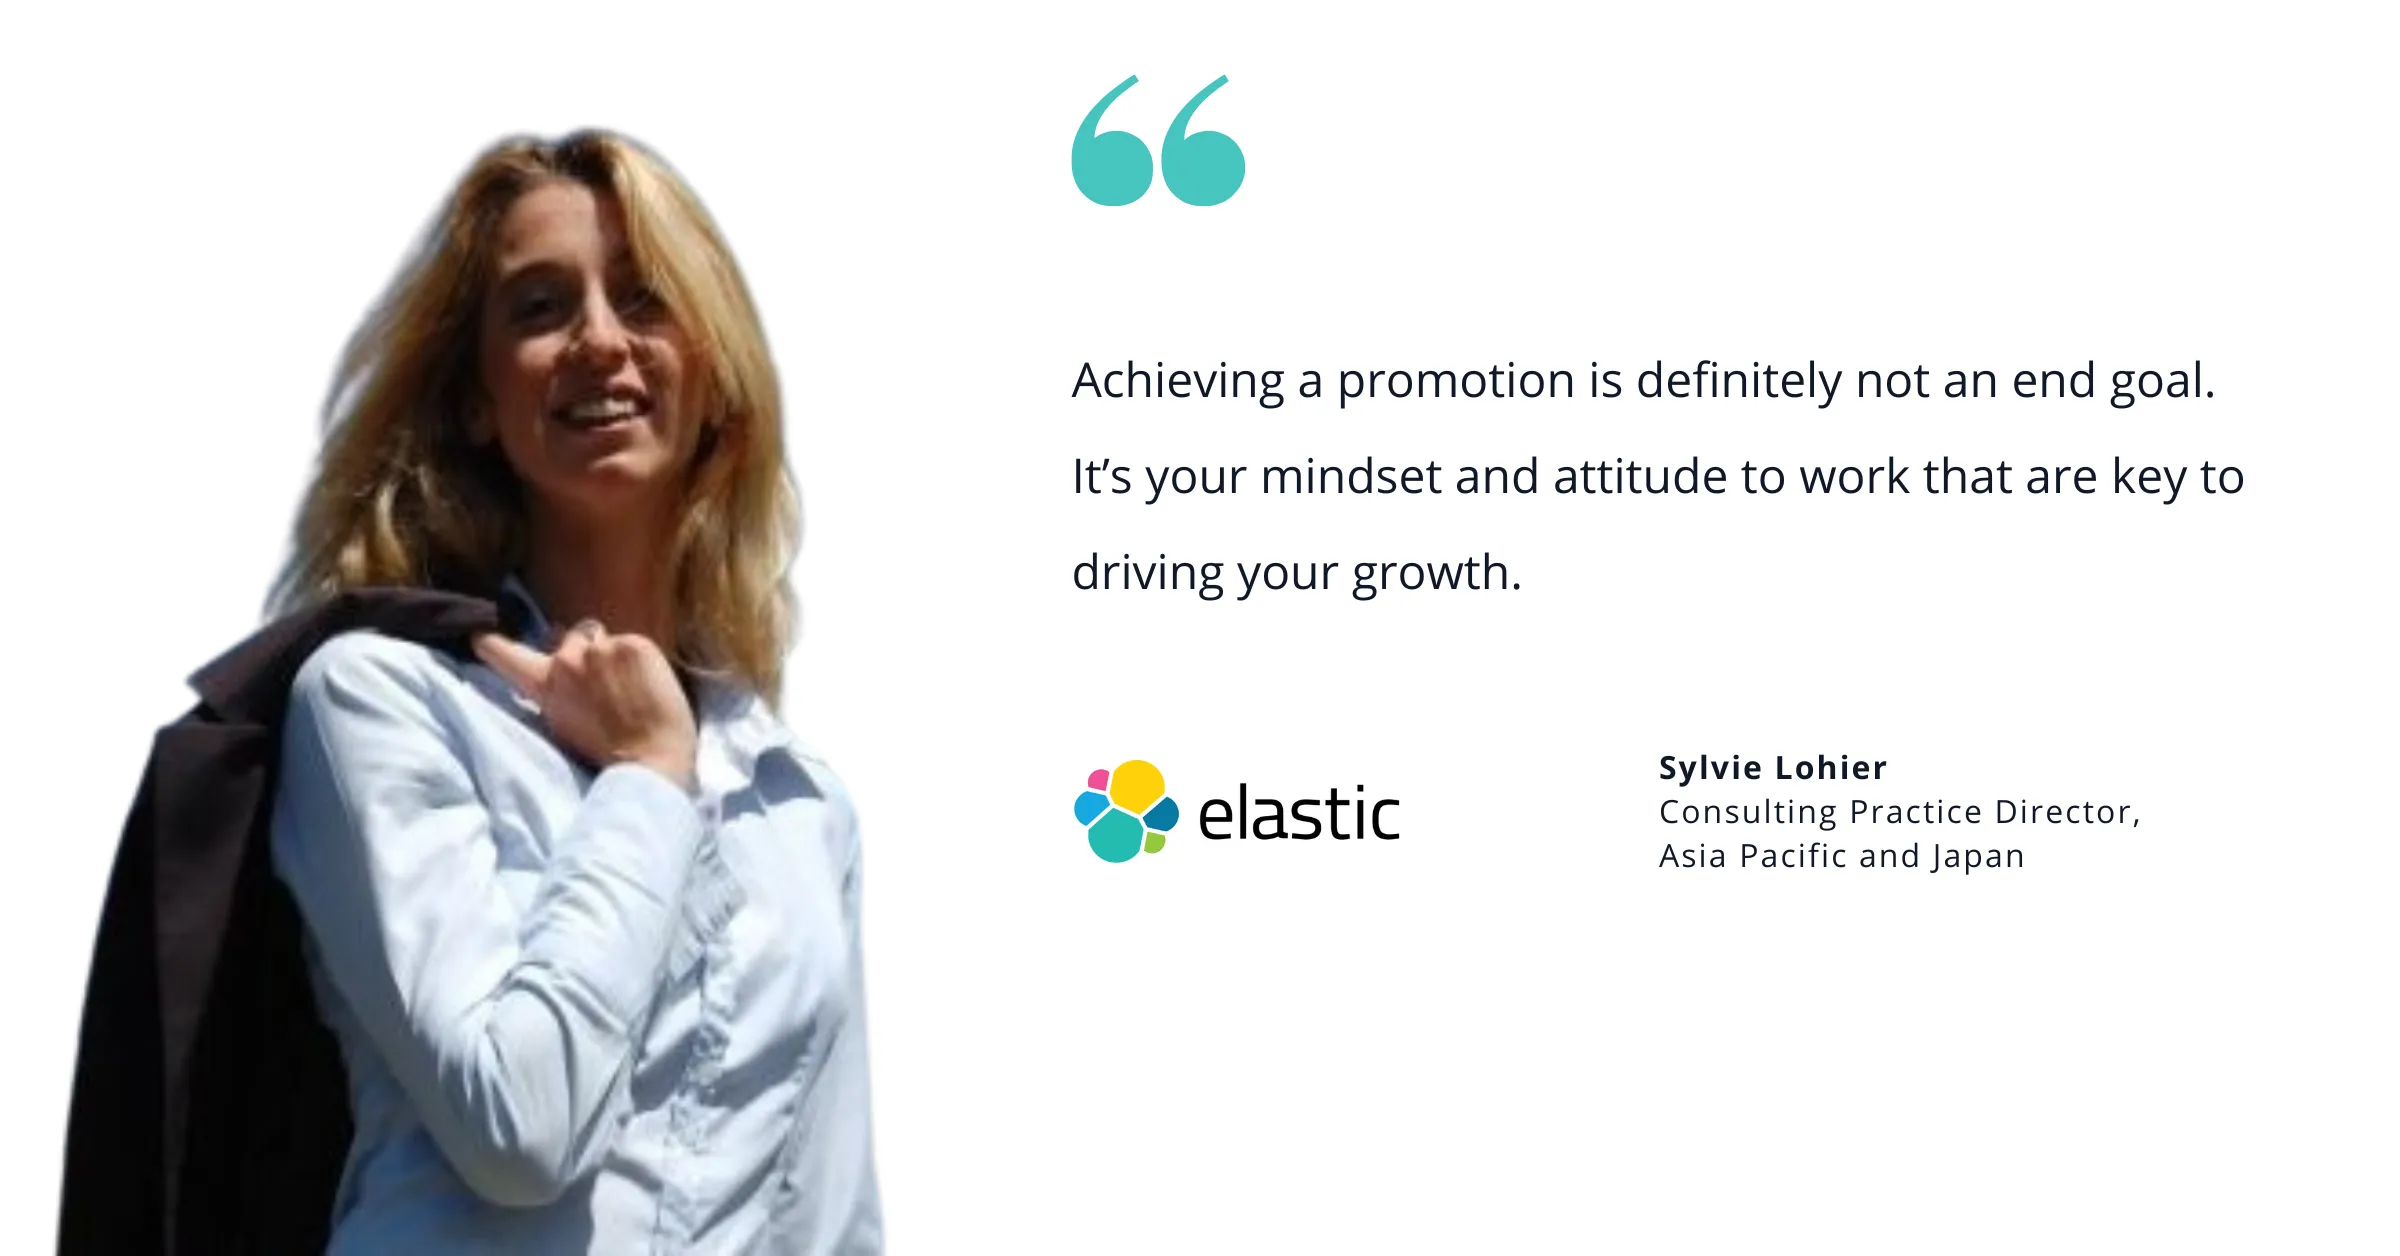 photo-of-elastic-s-sylvie-lohier-consulting-practice-director-for-asia-pacific-and-japan-with-quote-saying-achieving-a-promo.webp